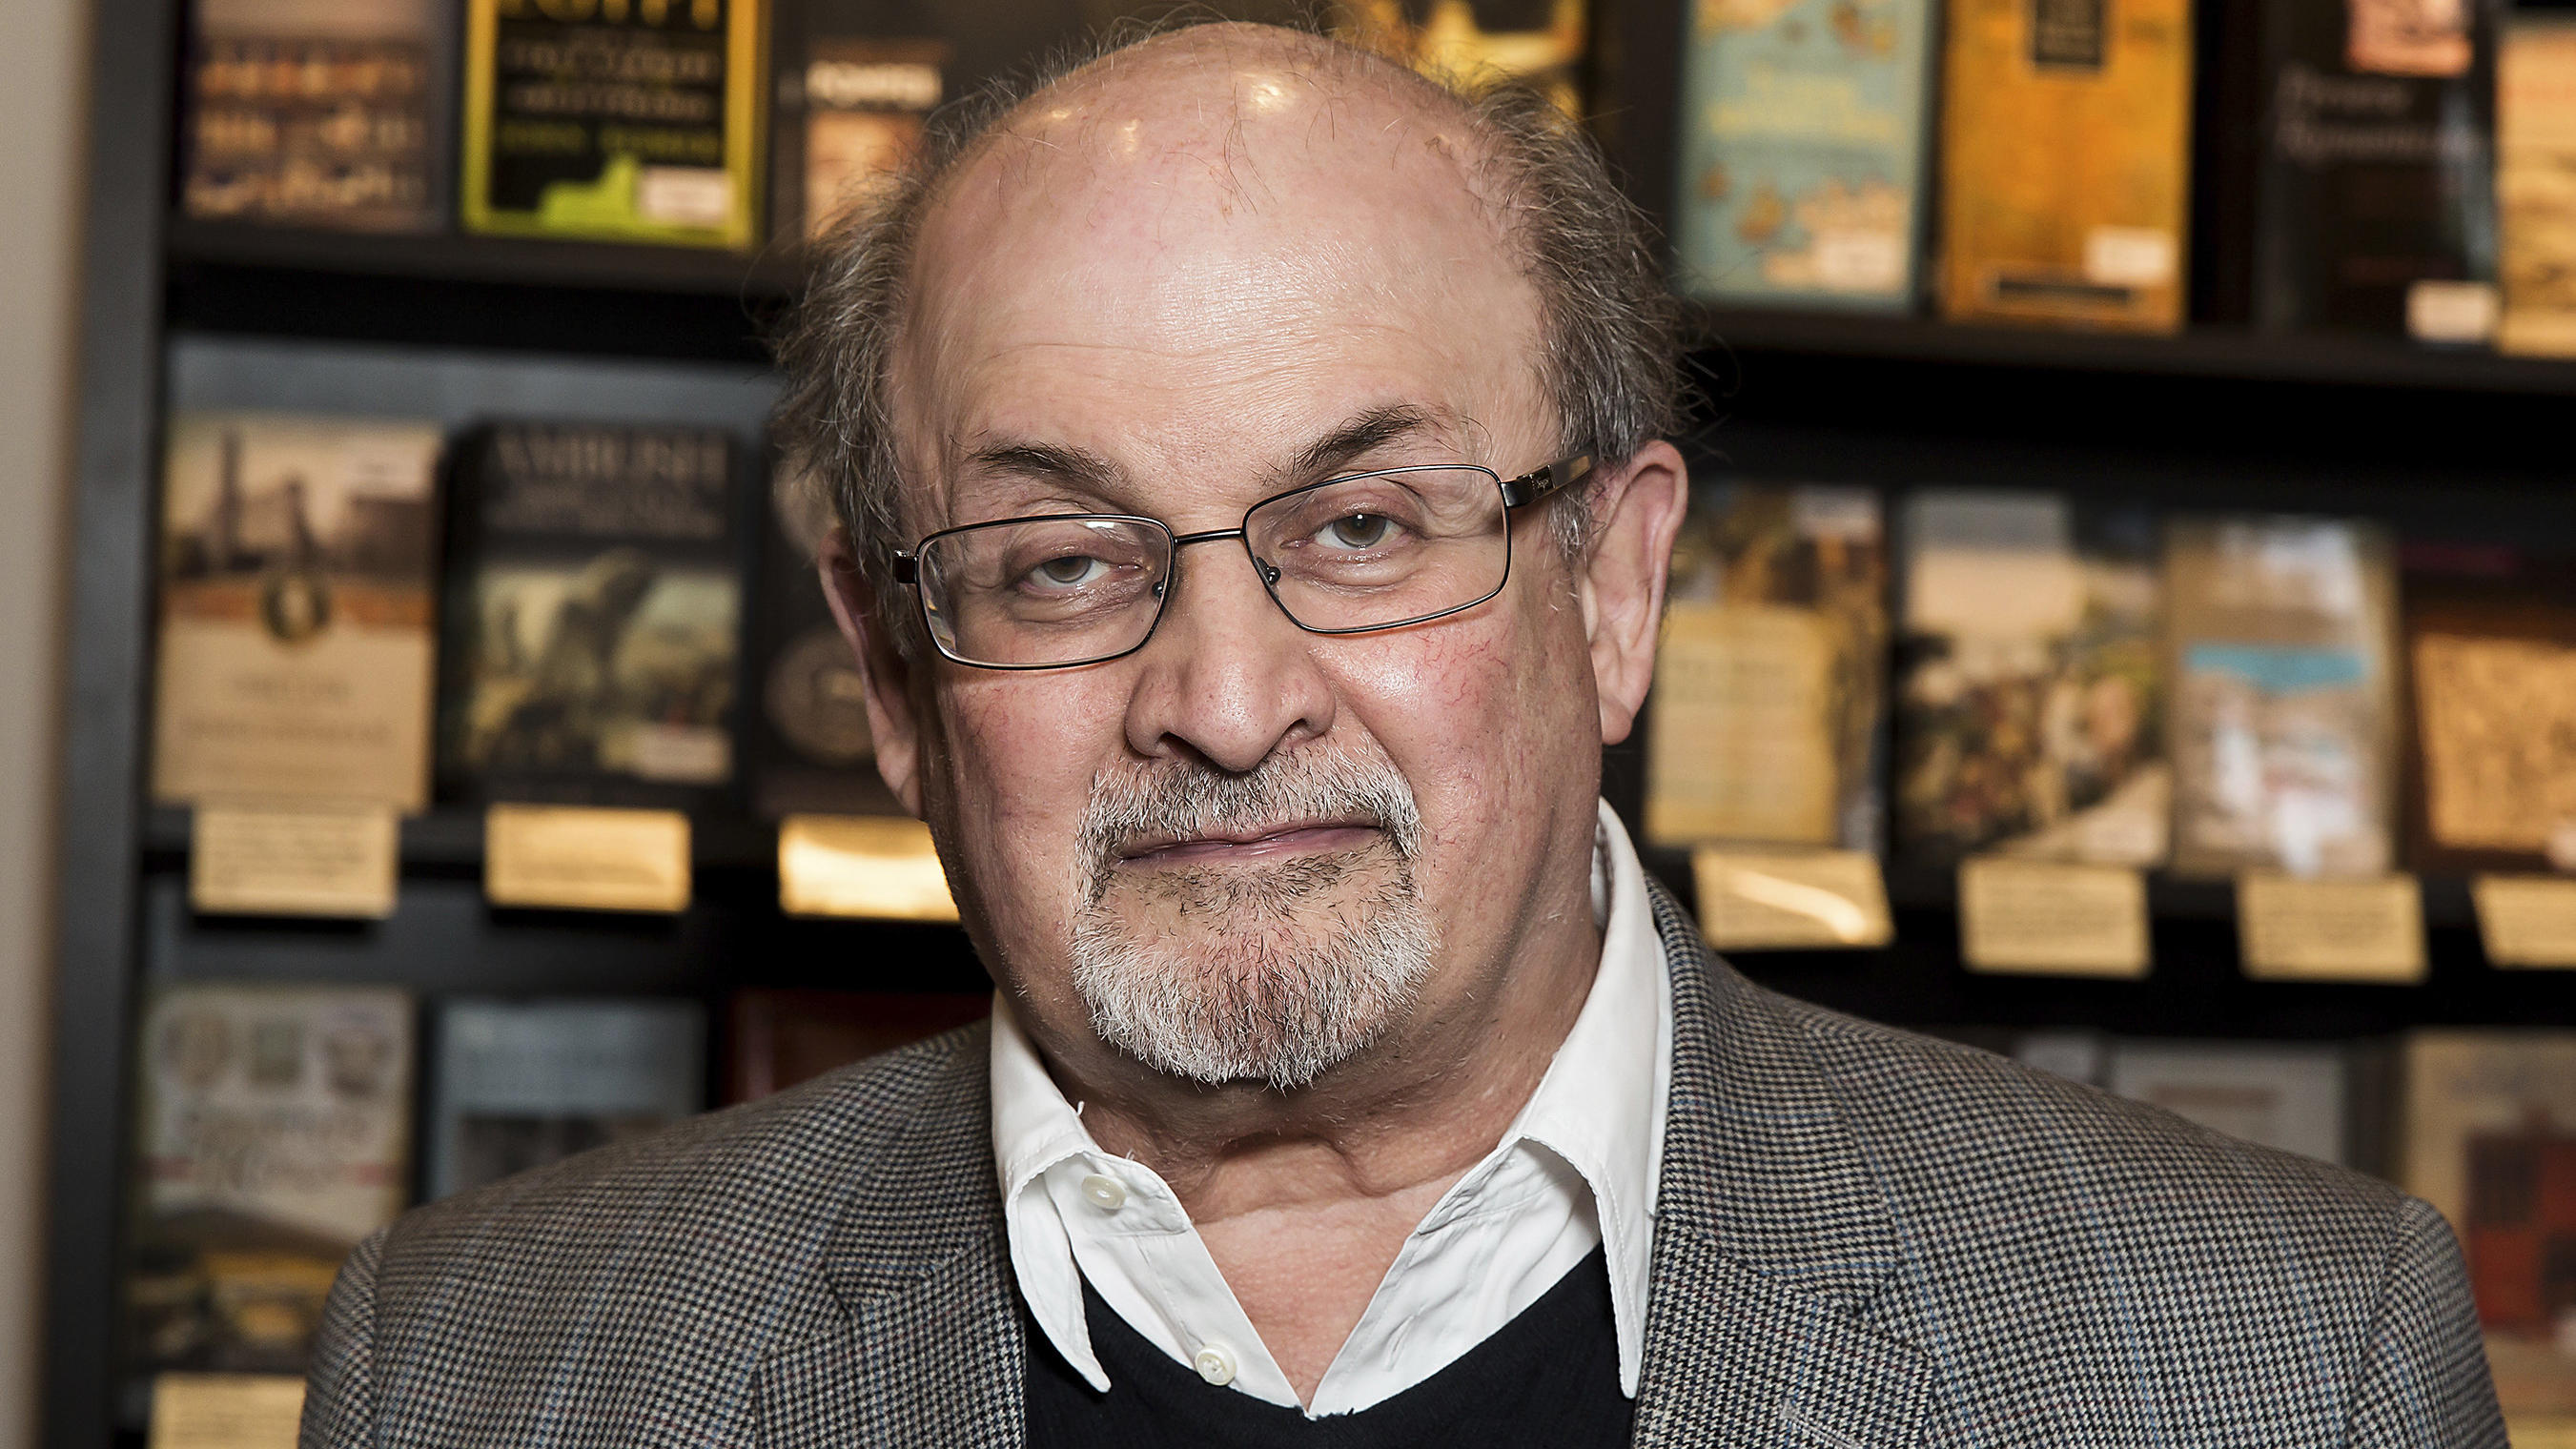 FILE - Author Salman Rushdie appears at a signing for his book "Home" in London on June 6, 2017. Rushdie has been attacked while giving a lecture in western New York. An Associated Press reporter witnessed a man storm the stage Friday at the Chautauq